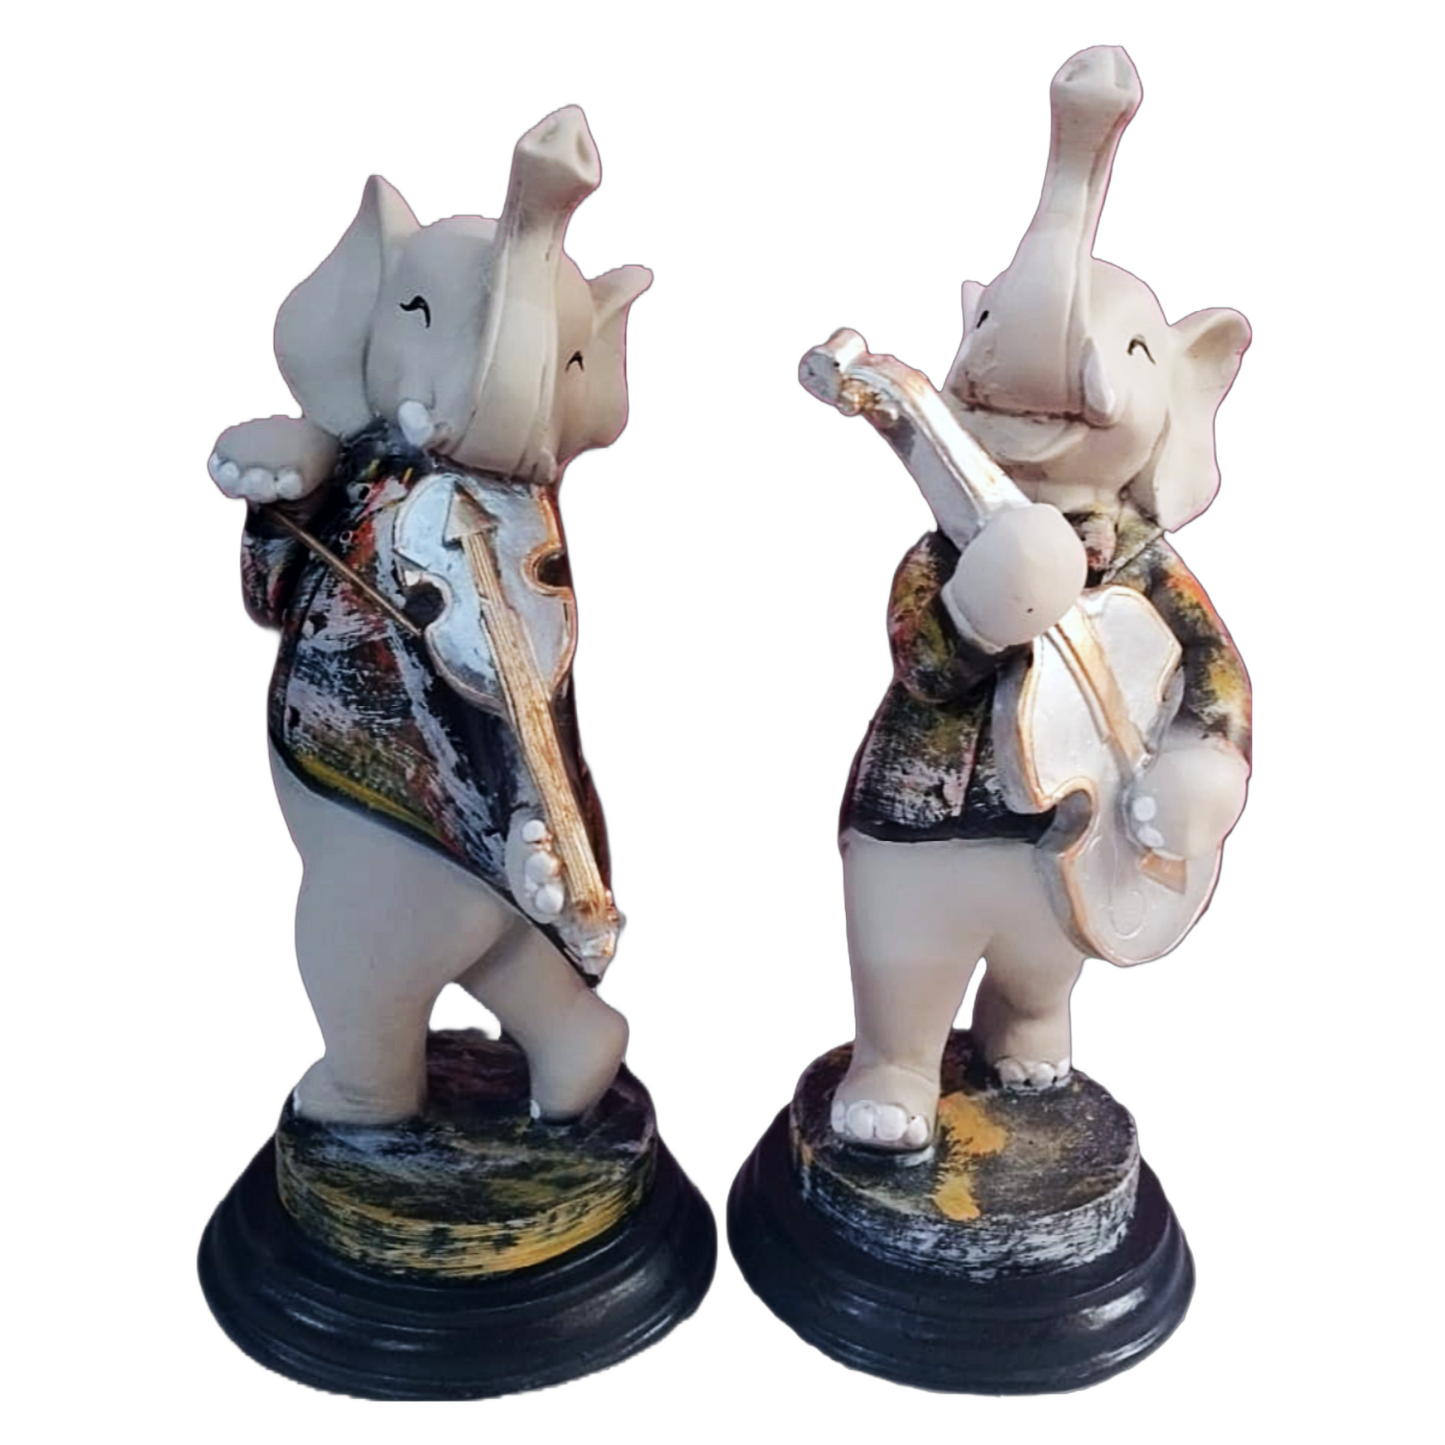 Statue ALiLA Musical Elephants Statue Showpiece Idol Exclusive for Gifting & Home Table Decoration, 10 inches Height Statue